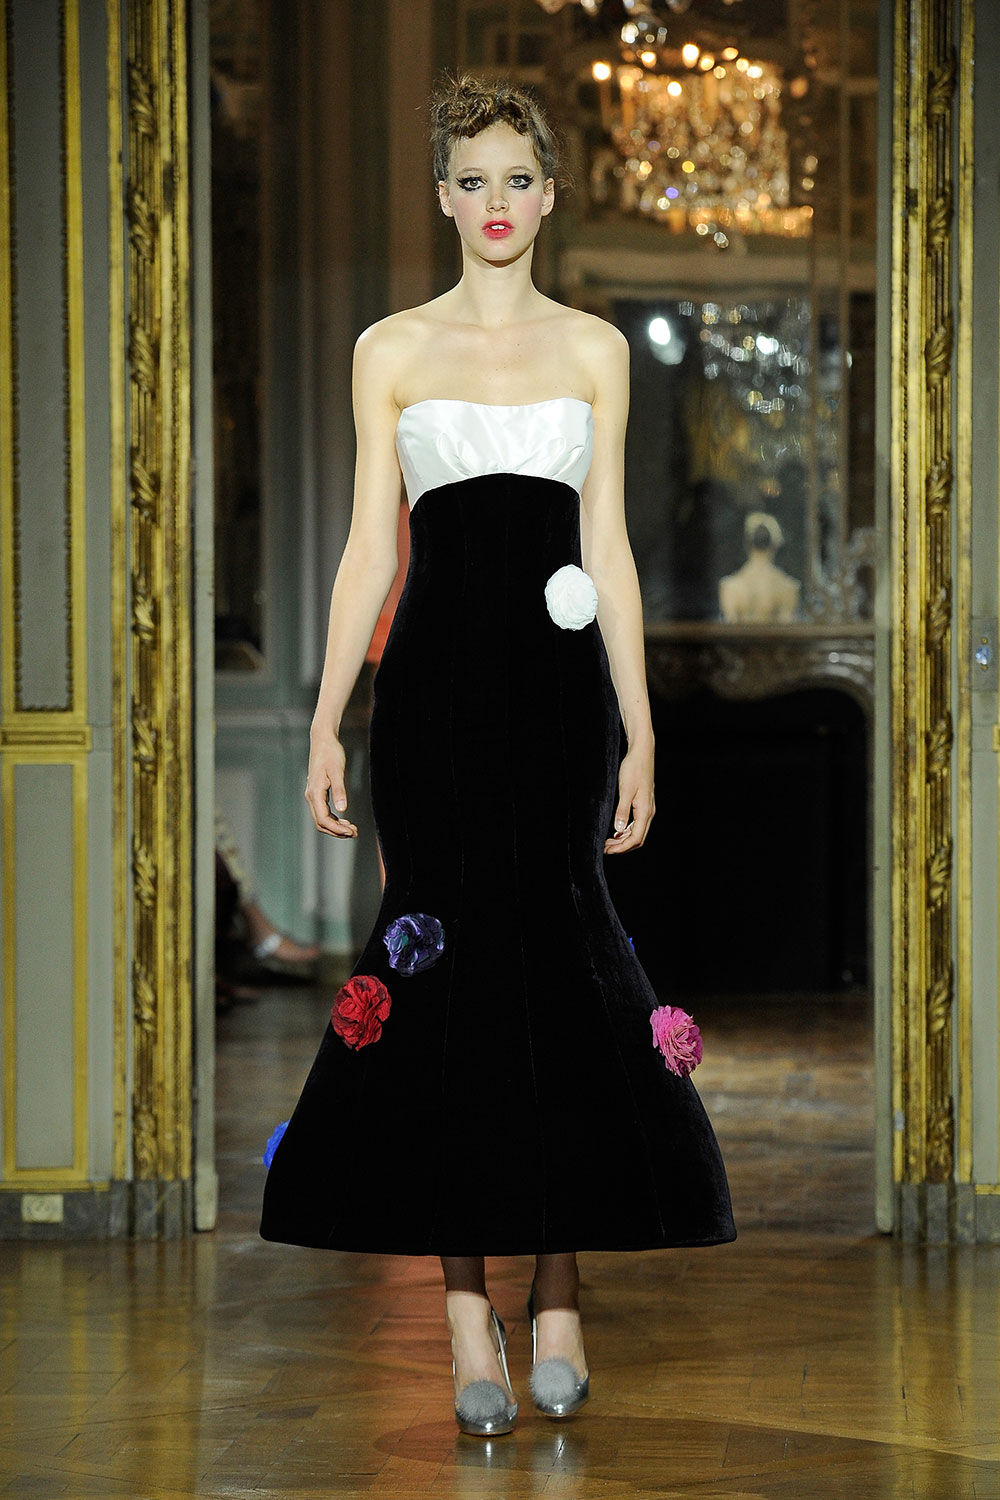 Look 34 from the Ulyana Sergeenko show at Paris Fashion Week Haute Couture FW 2015/2016. Photo / Getty Images